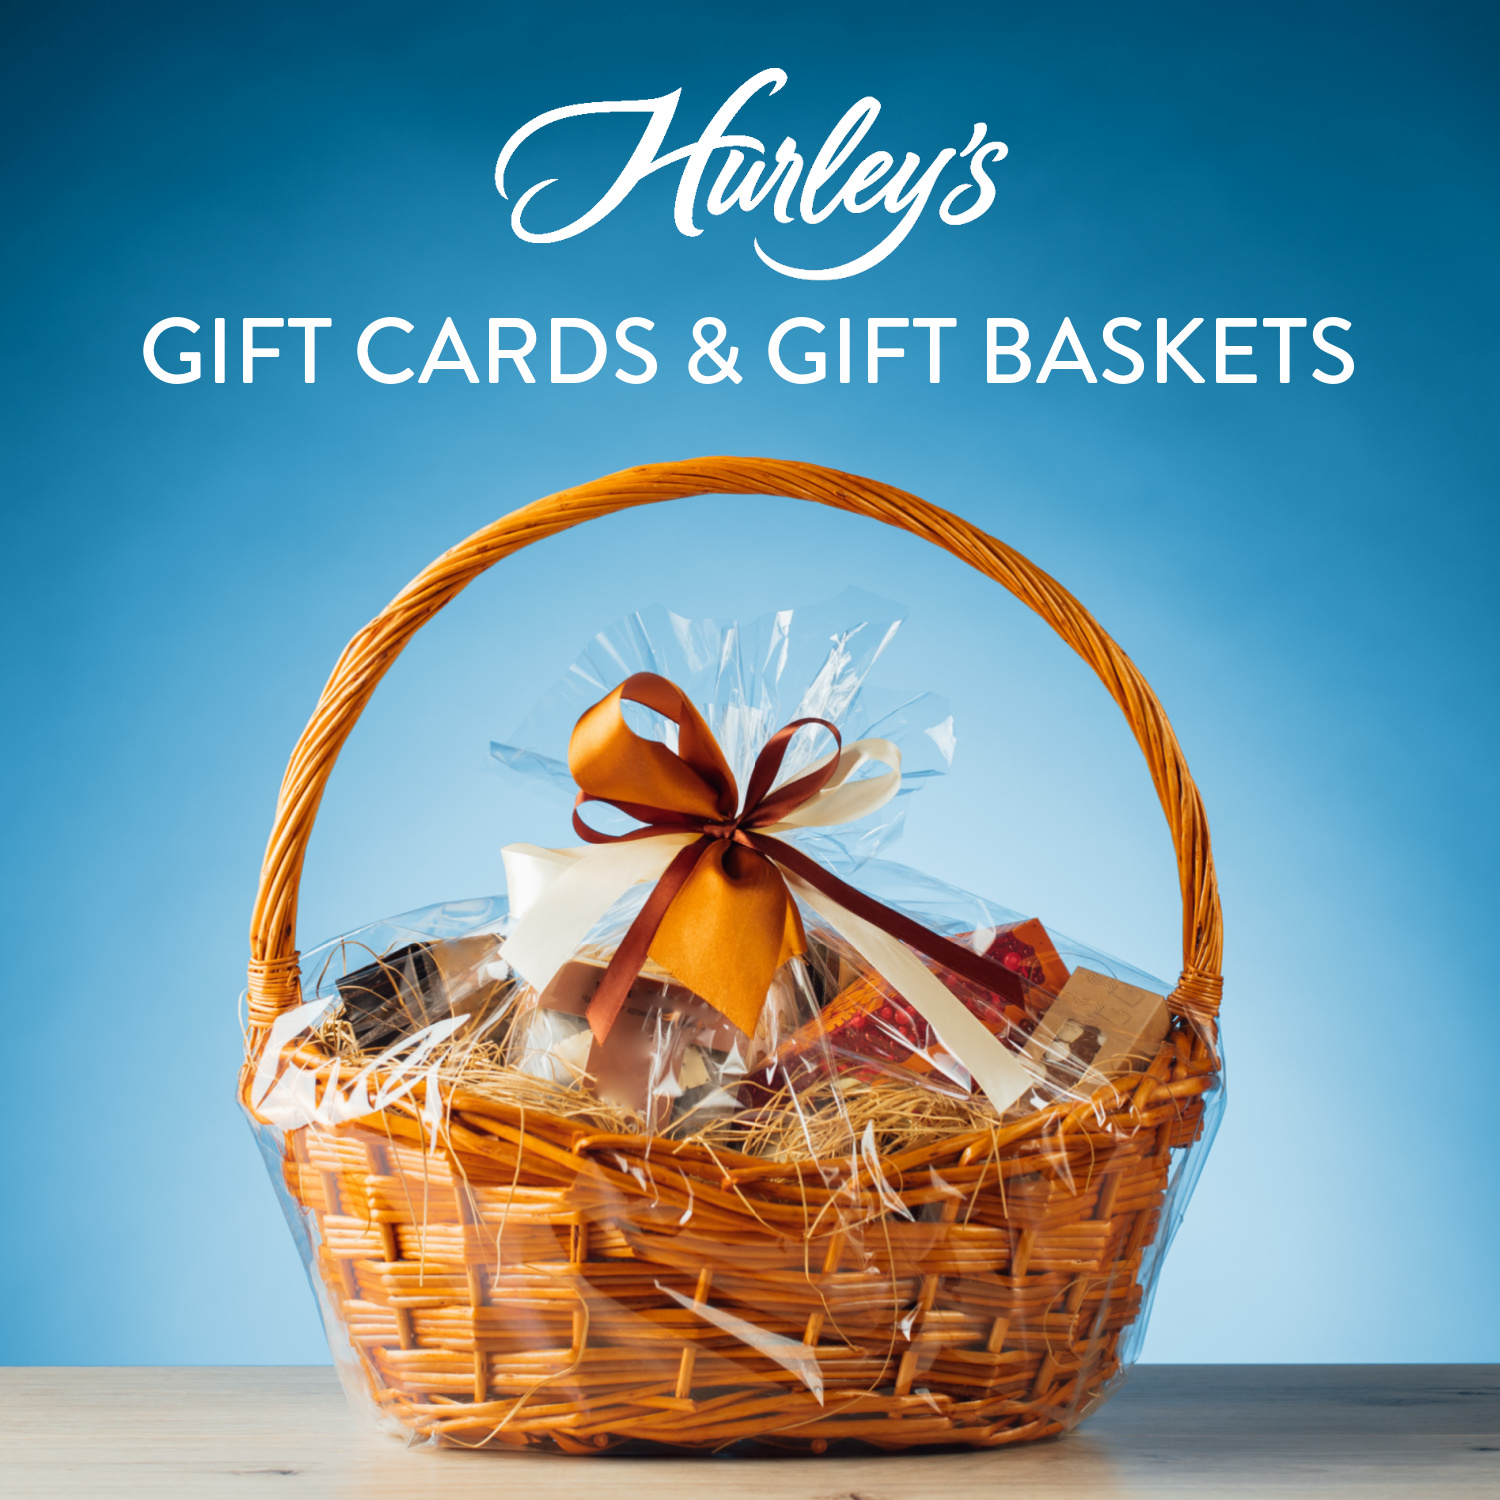 Hurley's Deals - Gift Cards & Gift Baskets